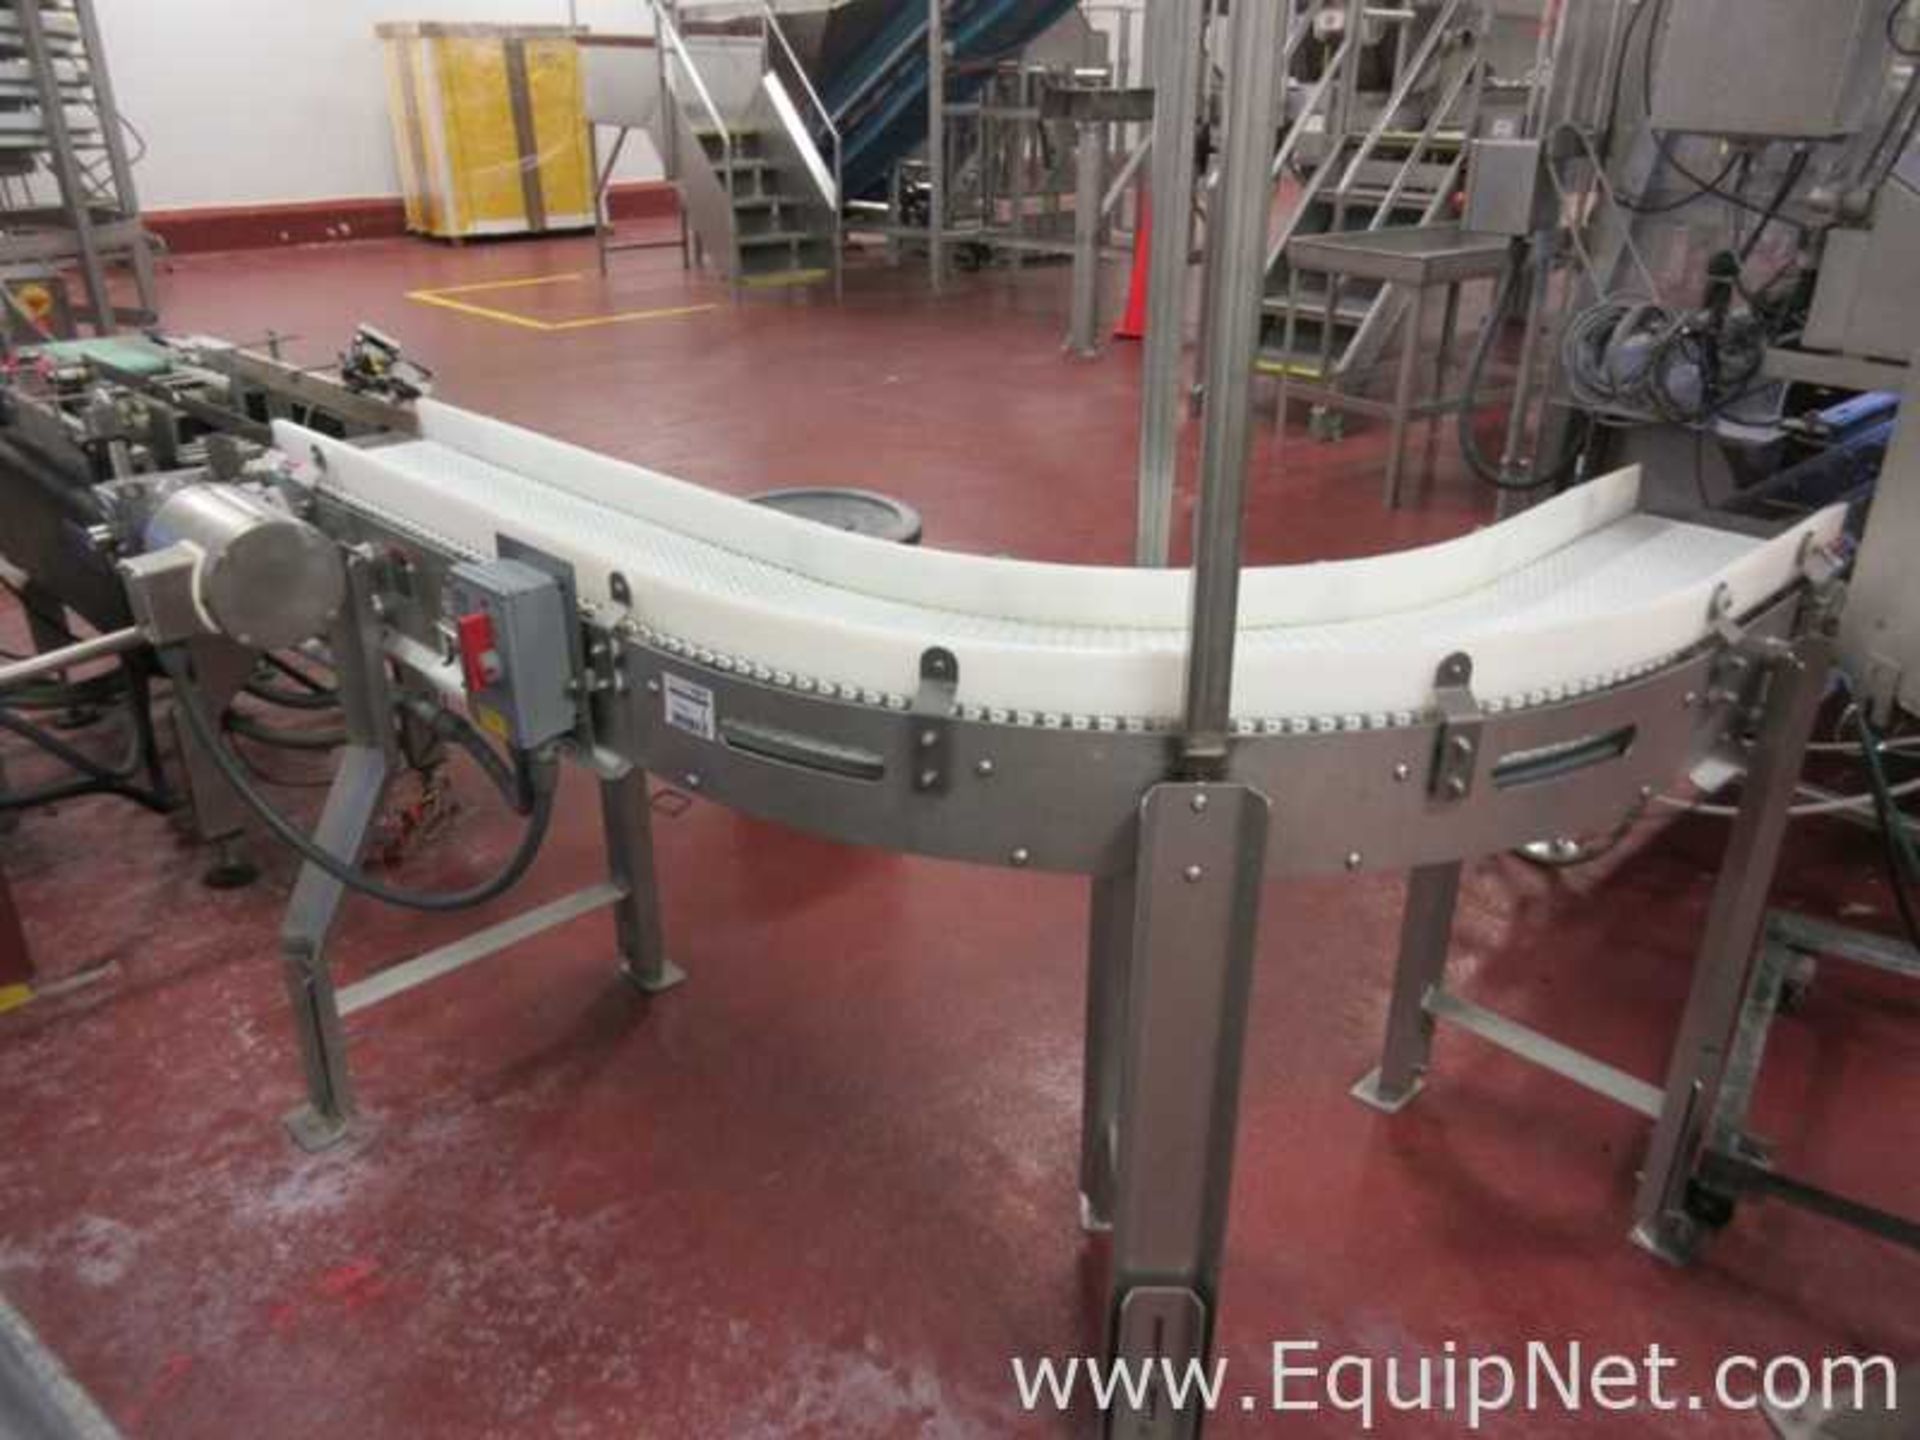 EQUIPNET LISTING #775995; REMOVAL COST: $515; DESCRIPTION: Curved stainless steel conveyor Coastline - Image 2 of 6